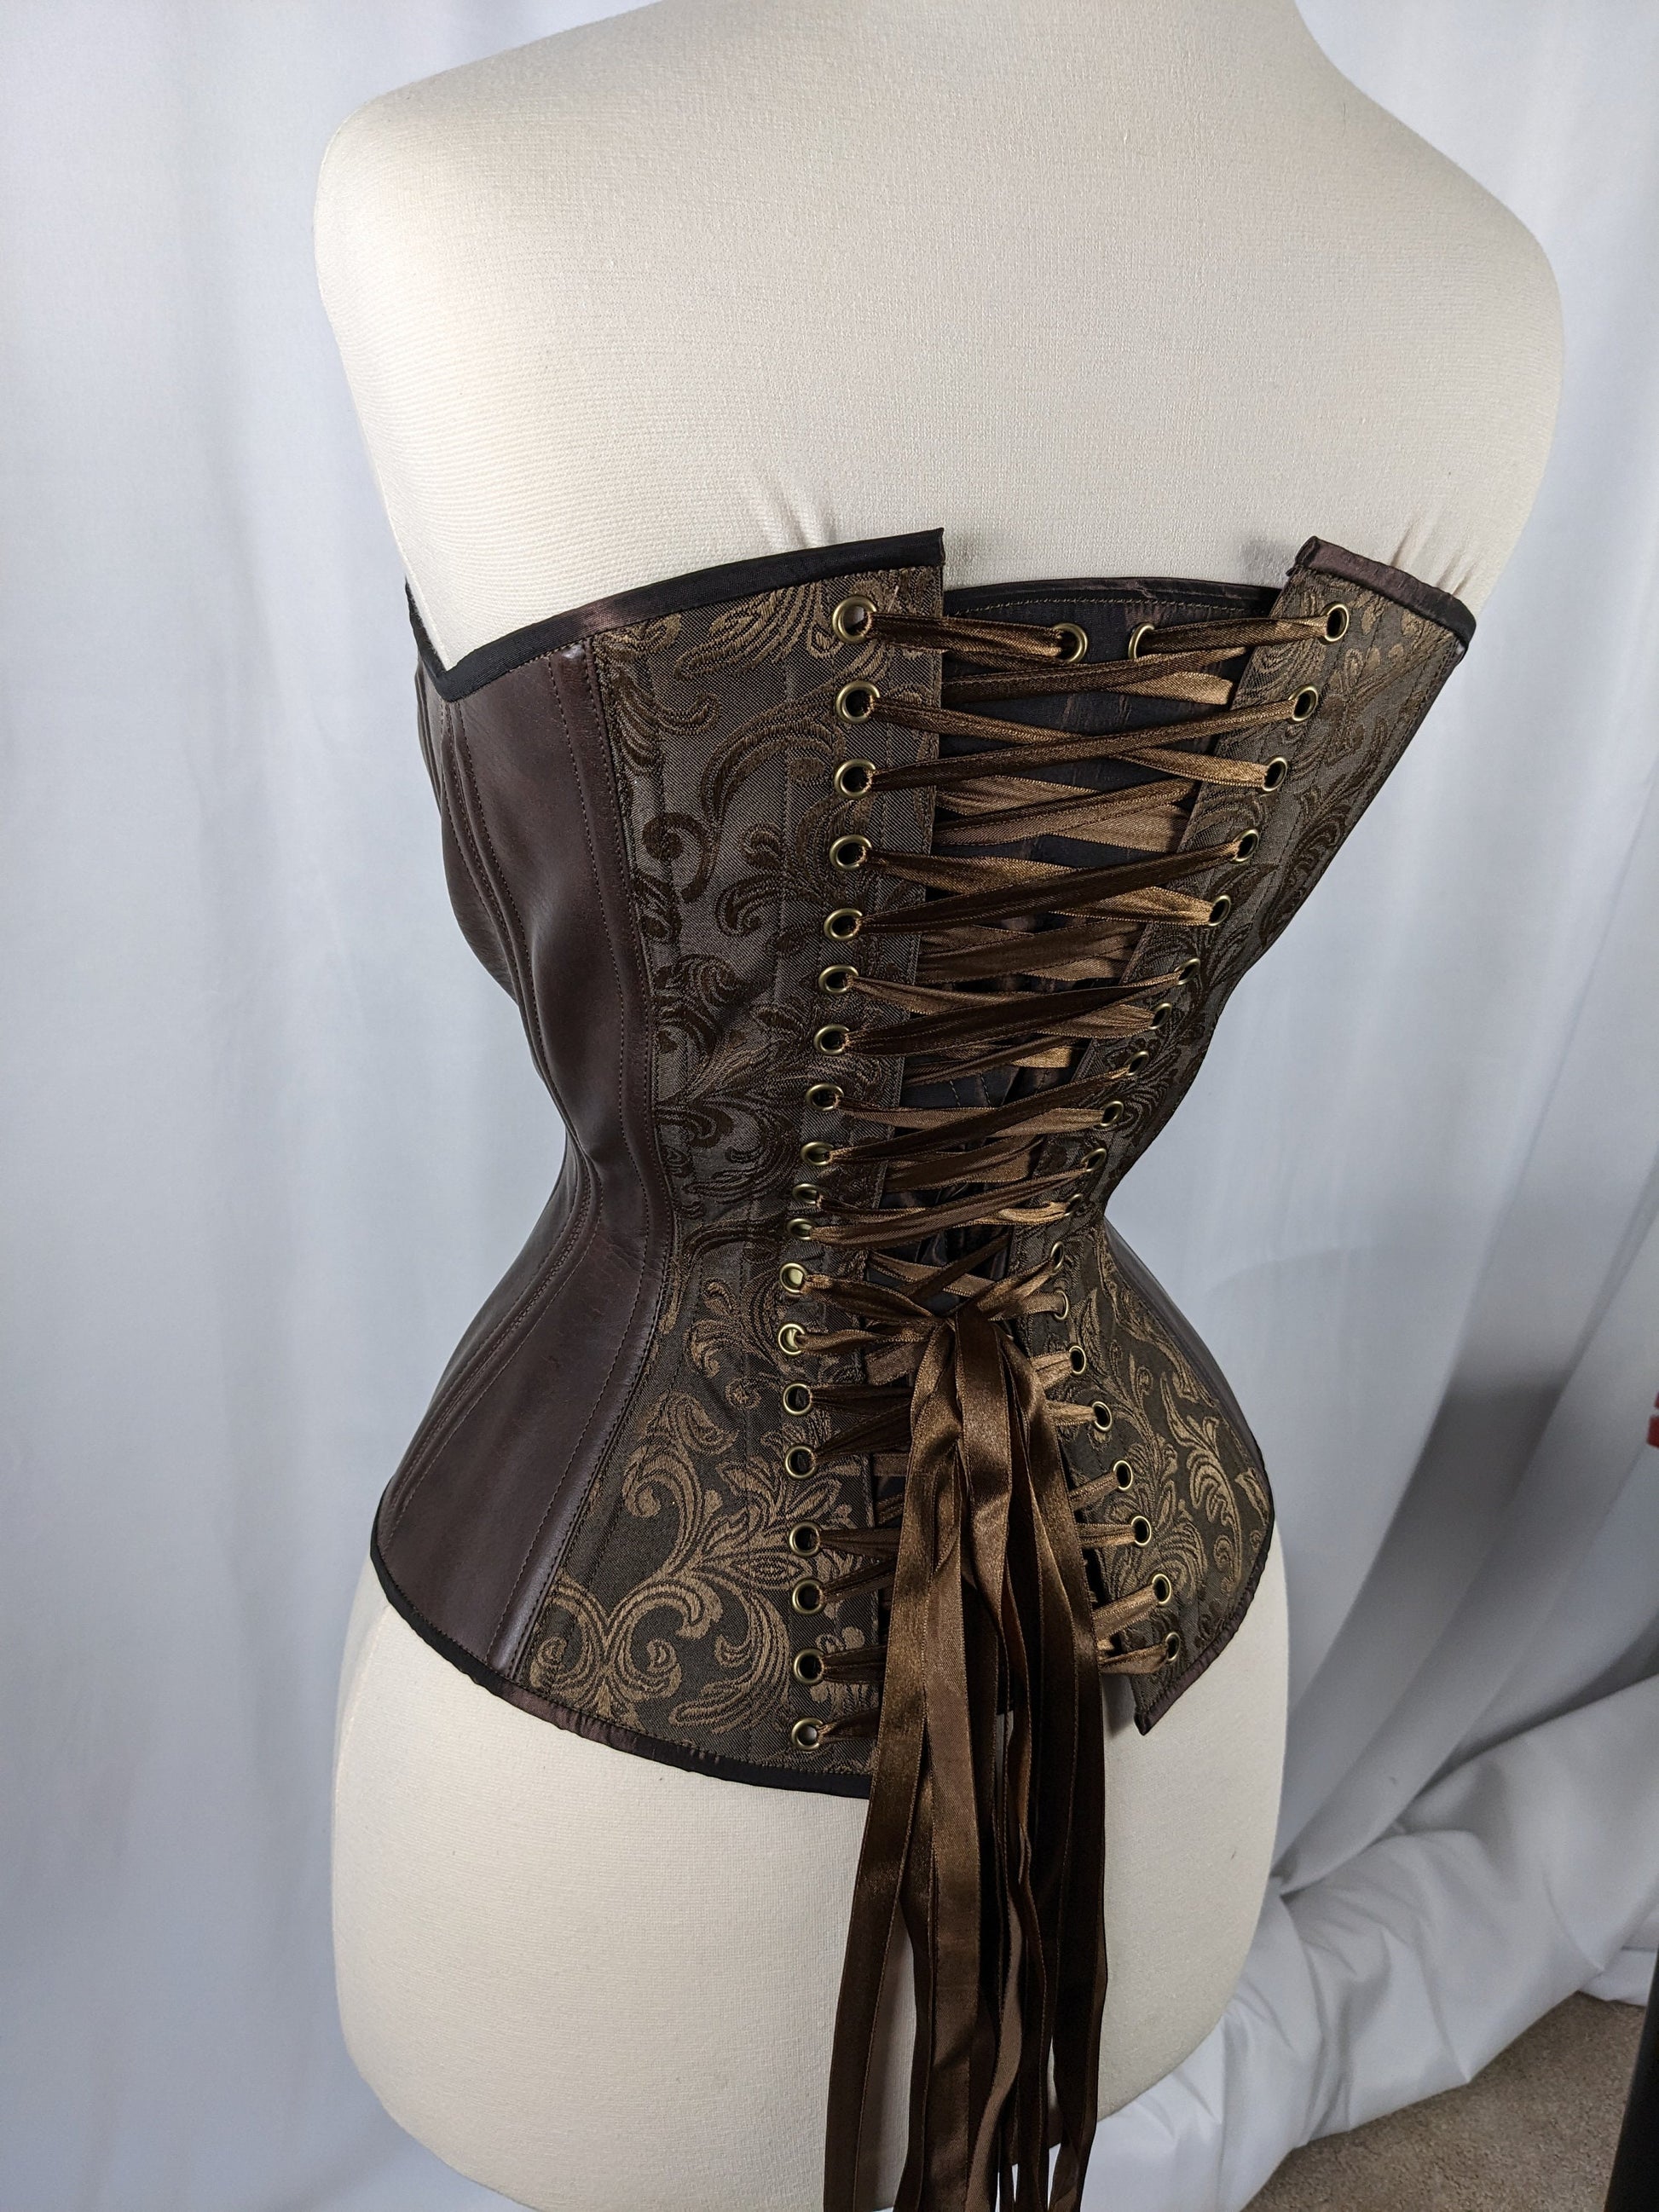 This Overbust Steel Boned Corset is very curvy